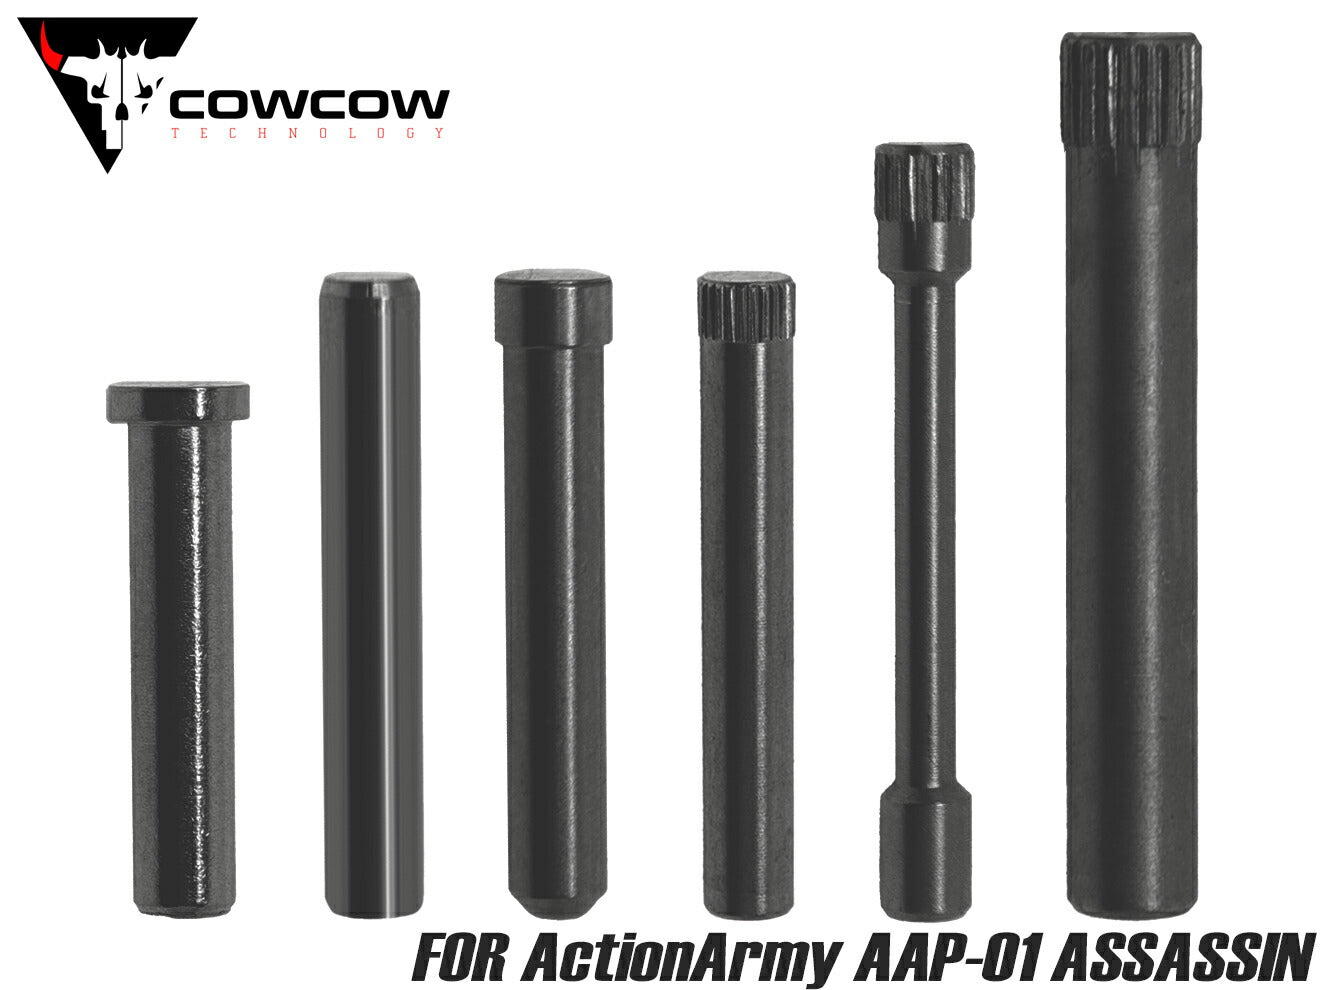 COWCOW TECHNOLOGY ステンレス 強化ピンセット for ActionArmy AAP-01